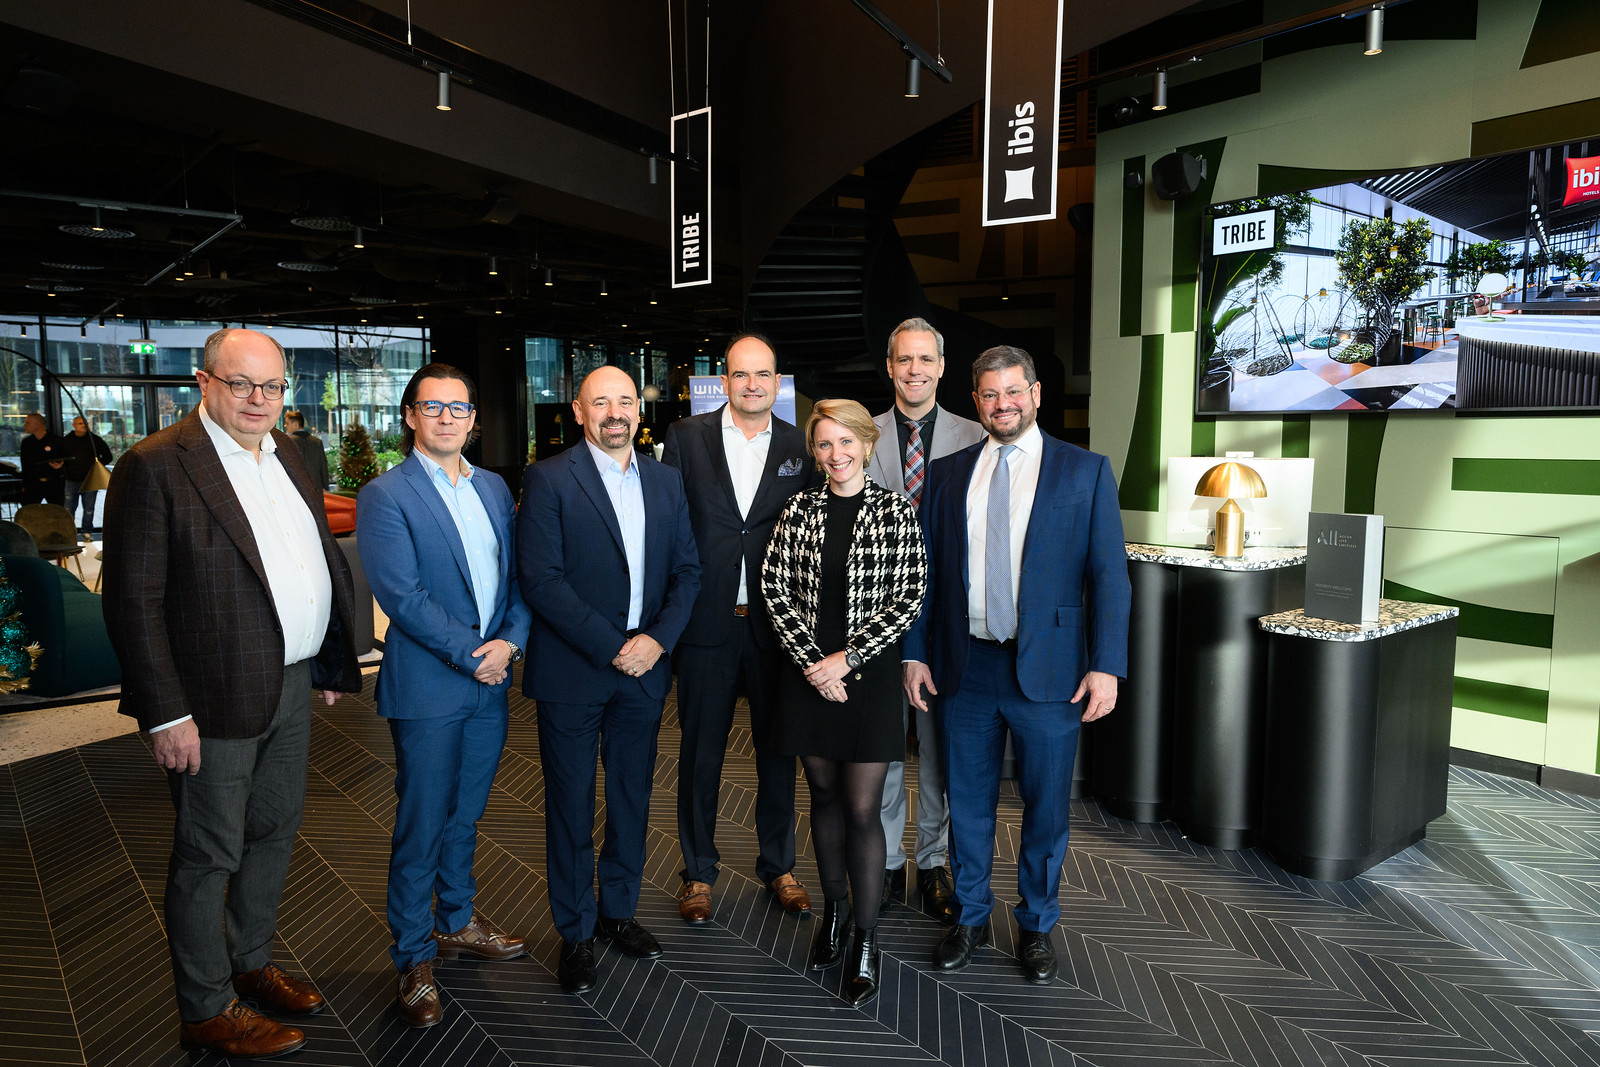 TRIBE brand premieres in Hungary with the opening of ibis & TRIBE Budapest Stadium